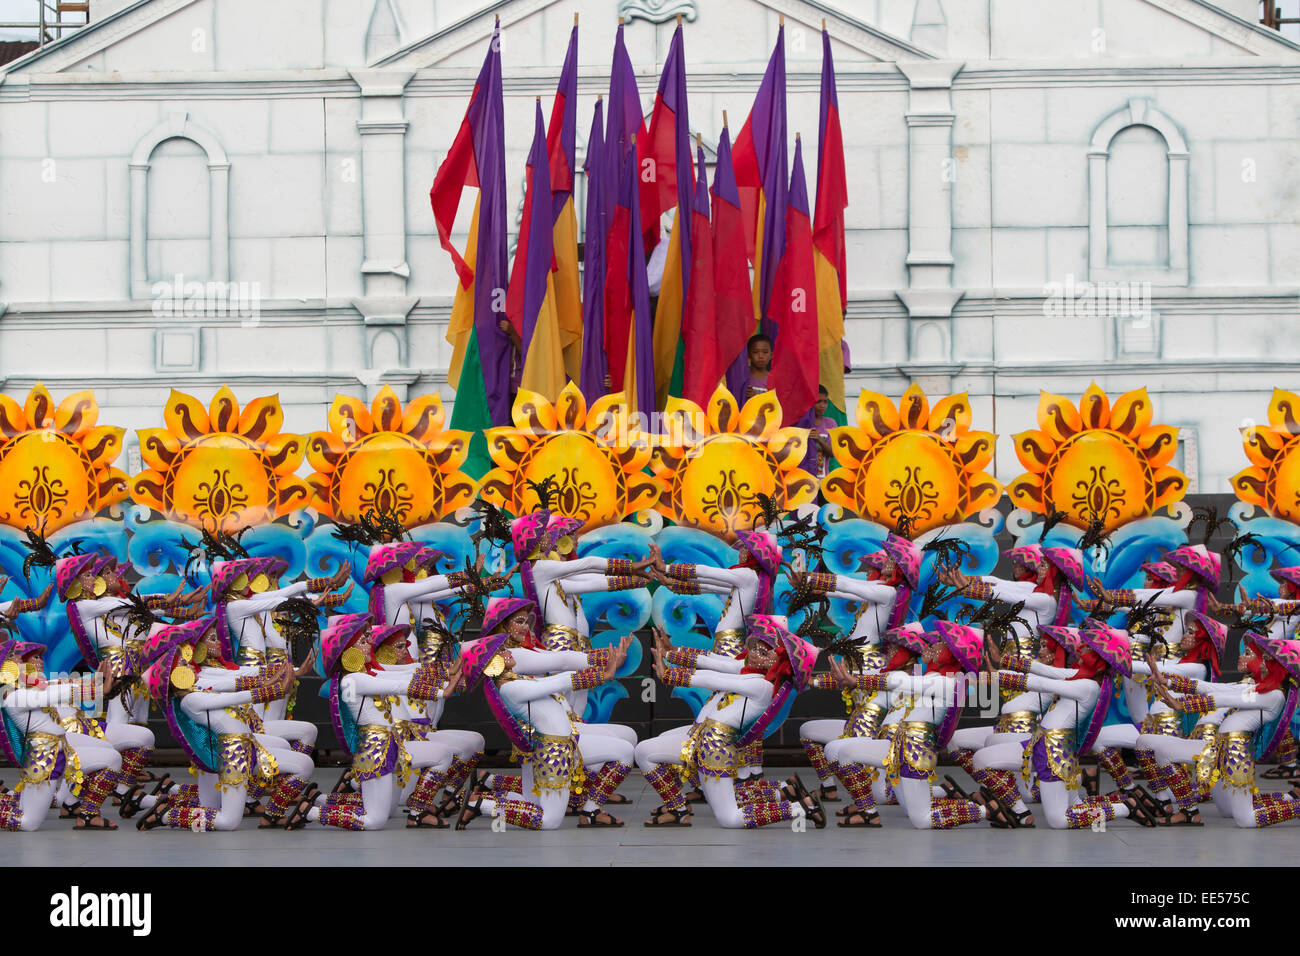 11/01/2015 Cebu City - Sinulog,one of the largest festivals in the Philippines takes place over a nine day period in January. Ce Stock Photo